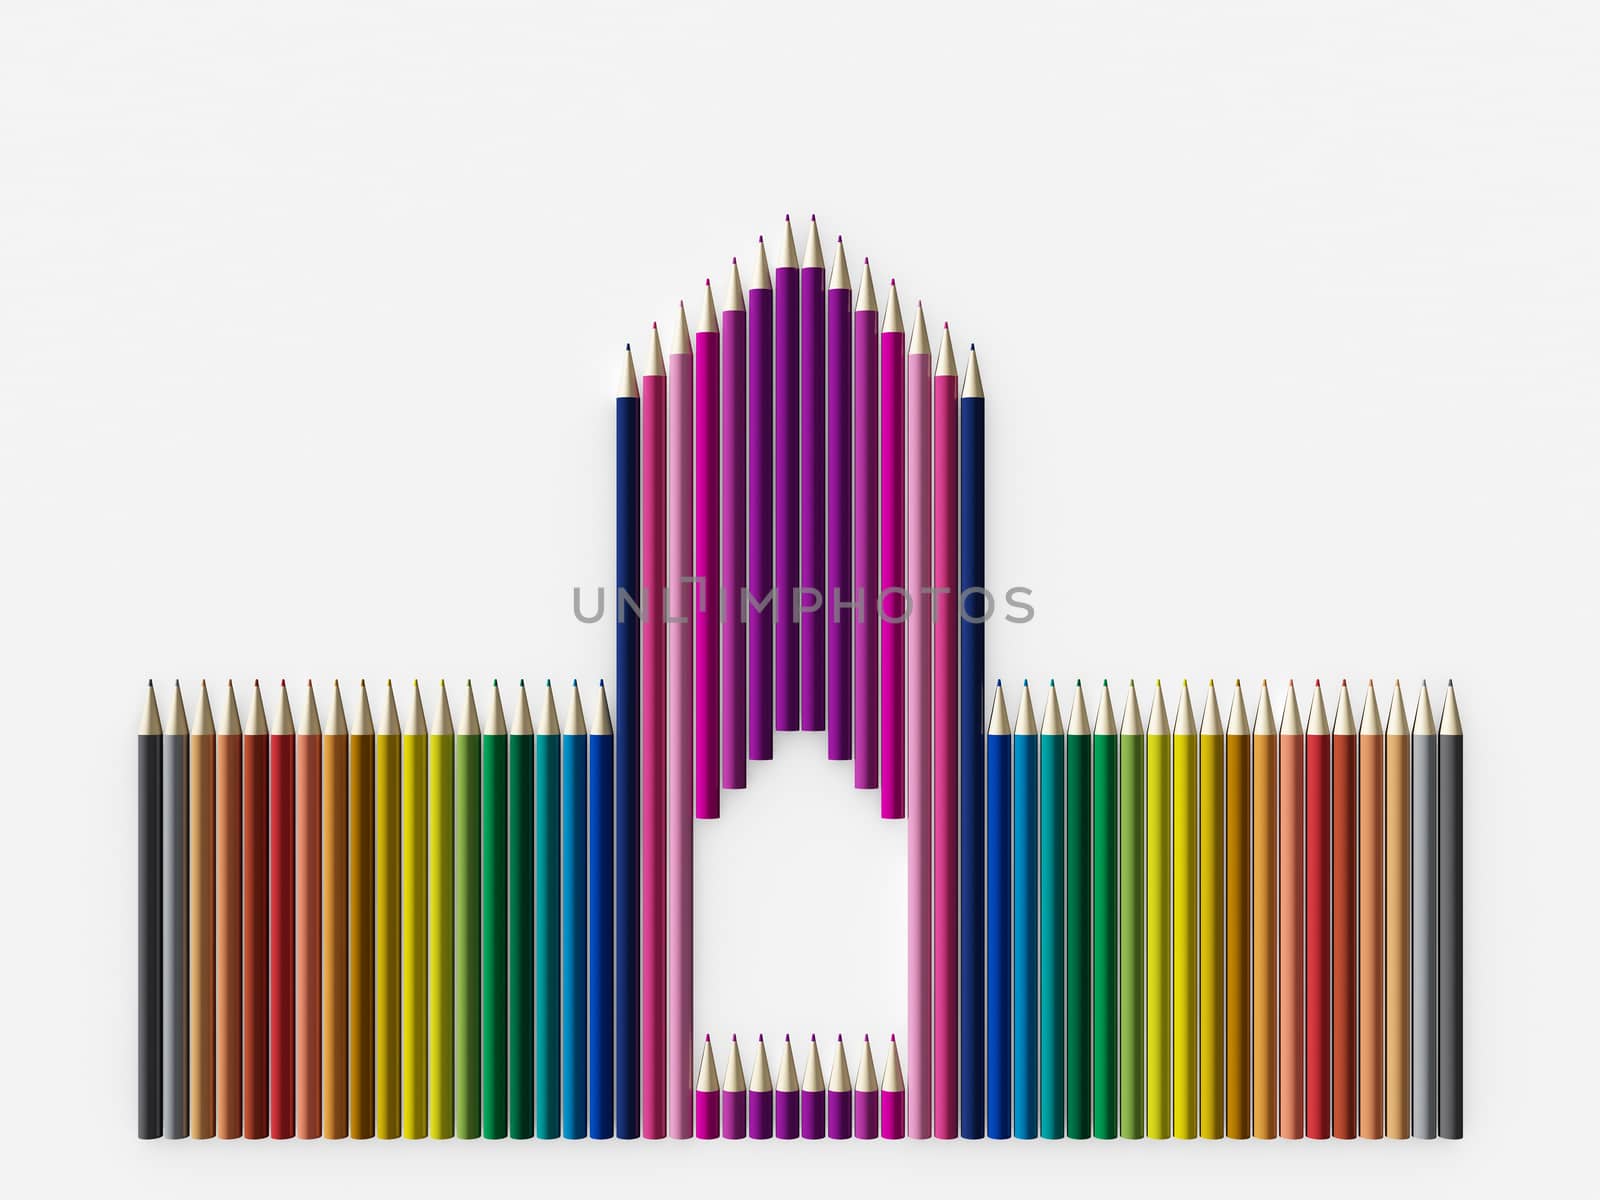 Colored pencils arranged in a castle, on white background, art object